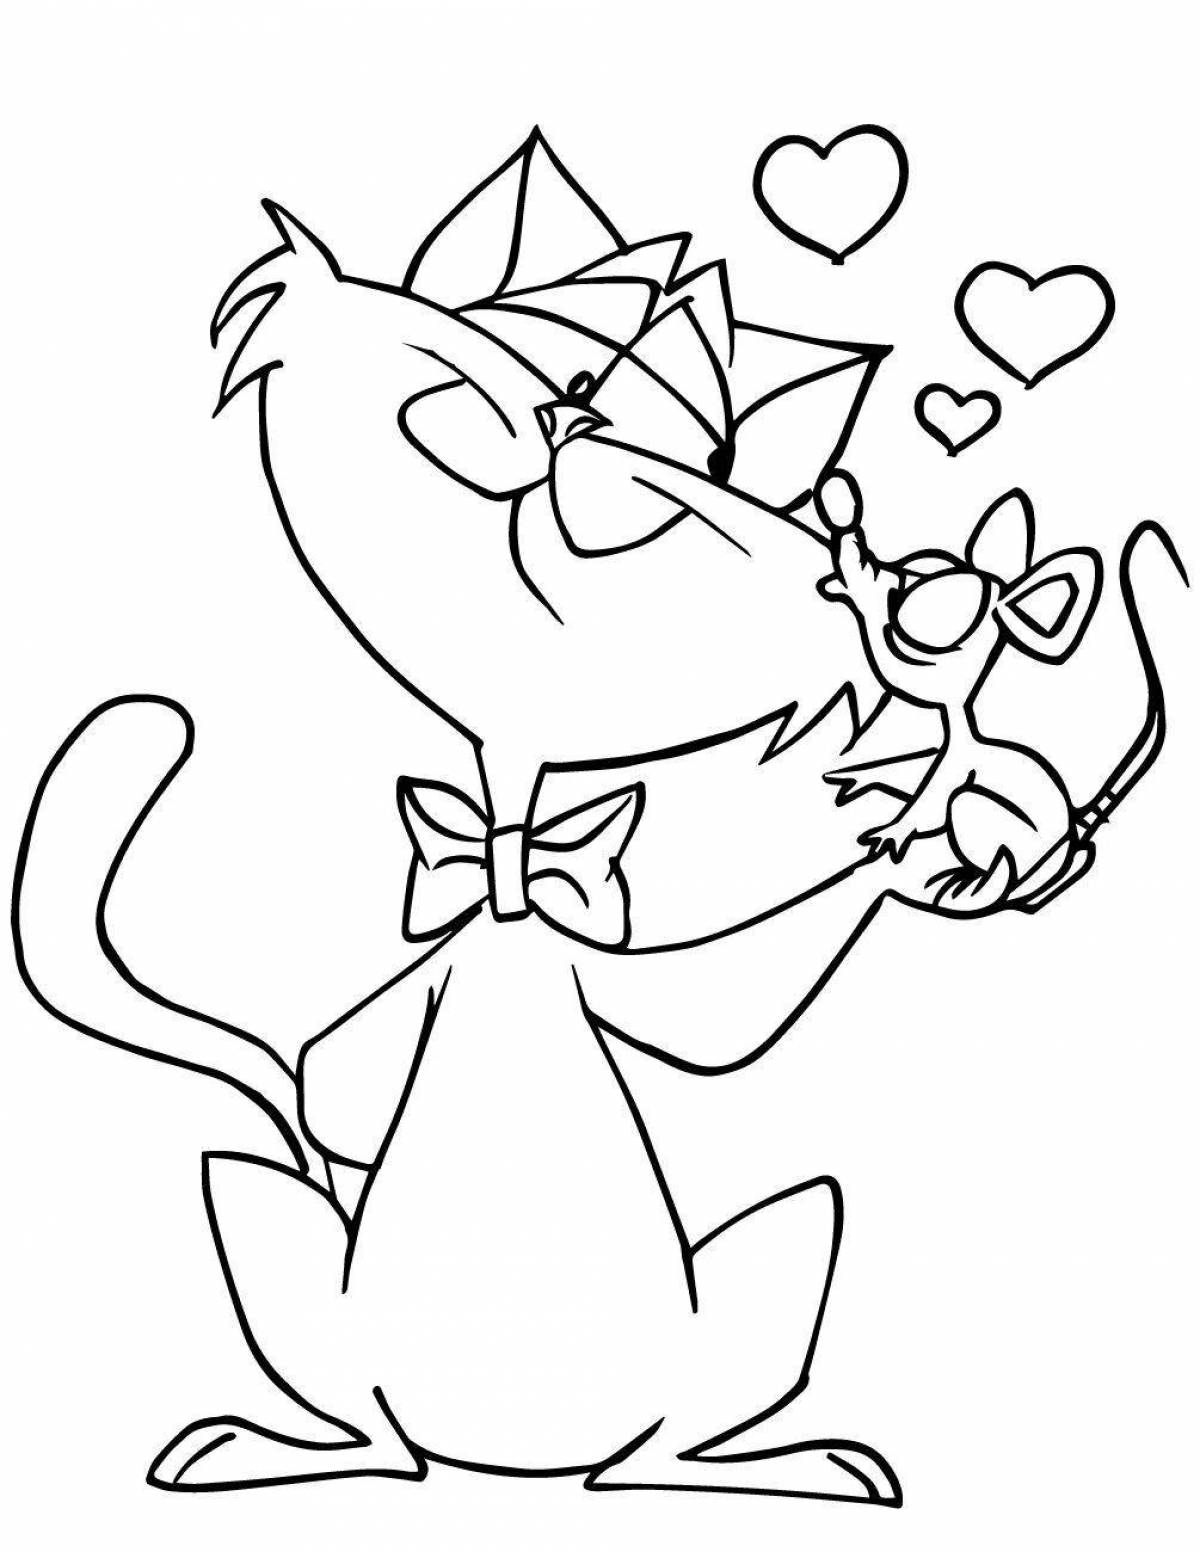 Attractive cat with a heart coloring book